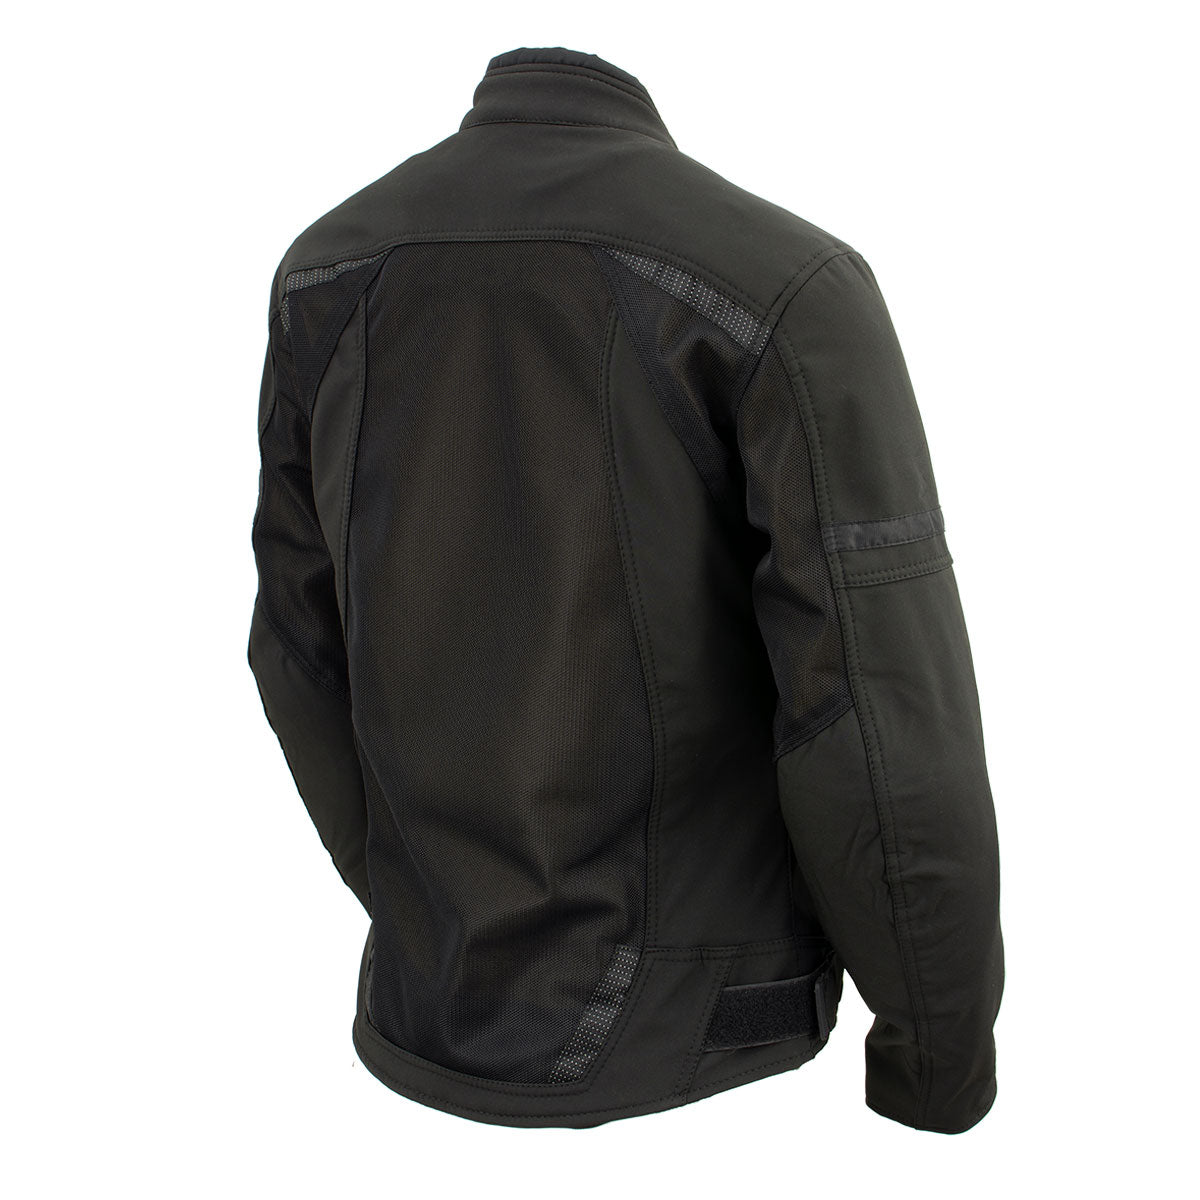 Xelement 'Gold Series' XS22005 Women's Black 'Cool Racer' Textile and Soft-Shell Scooter Biker Jacket with X-Armor